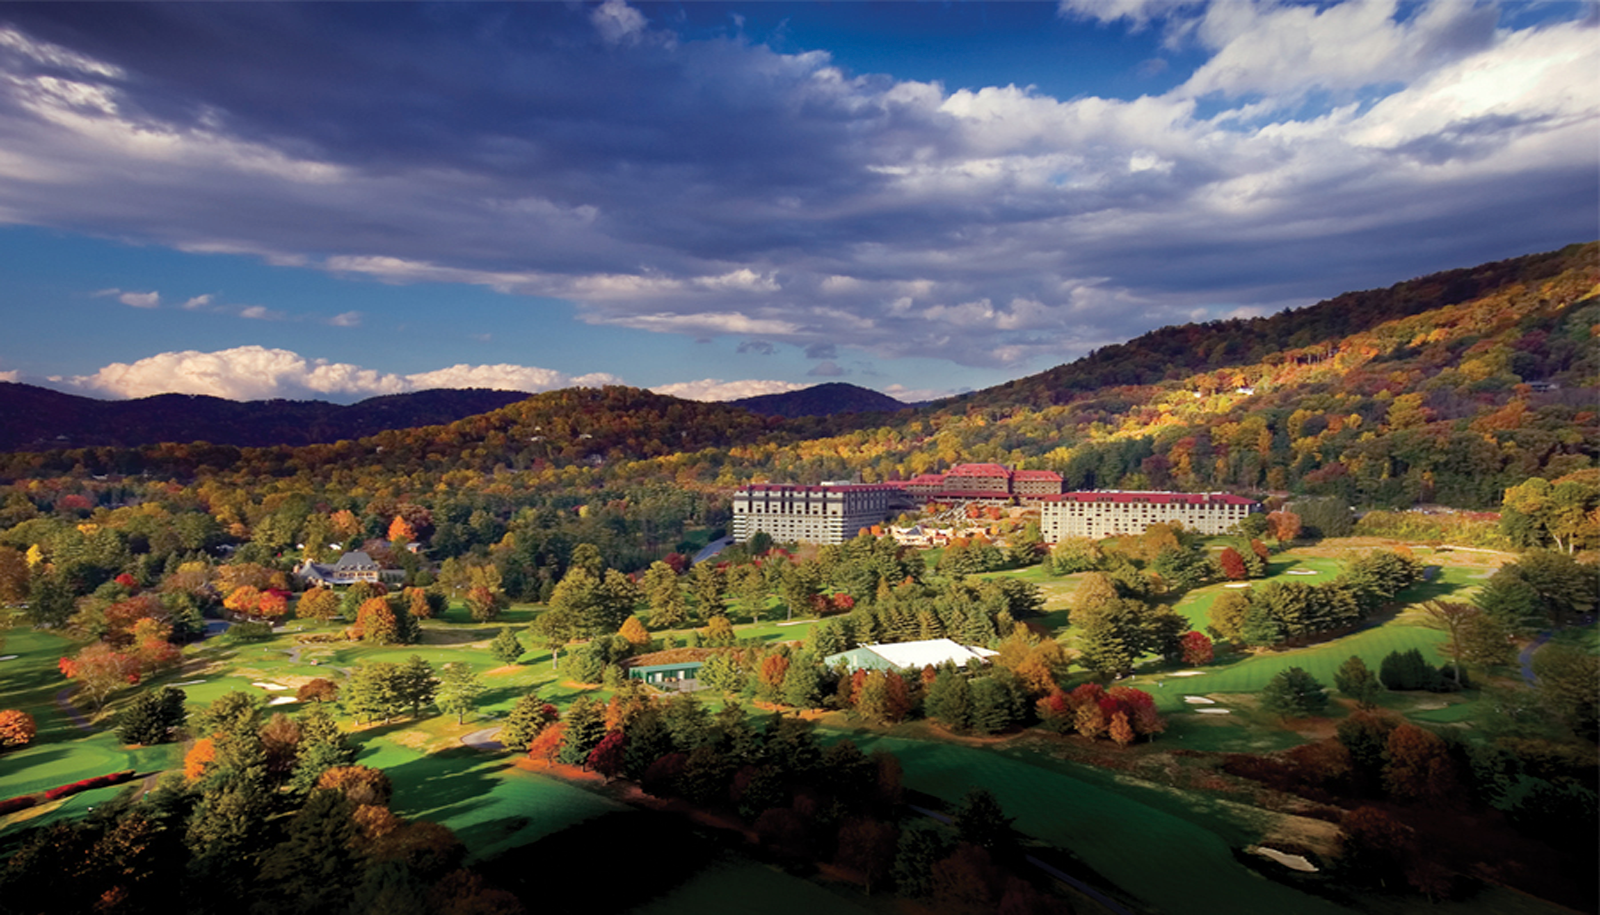 Basic to Advanced Echocardiography | From the Blue Ridge Mountains of Asheville